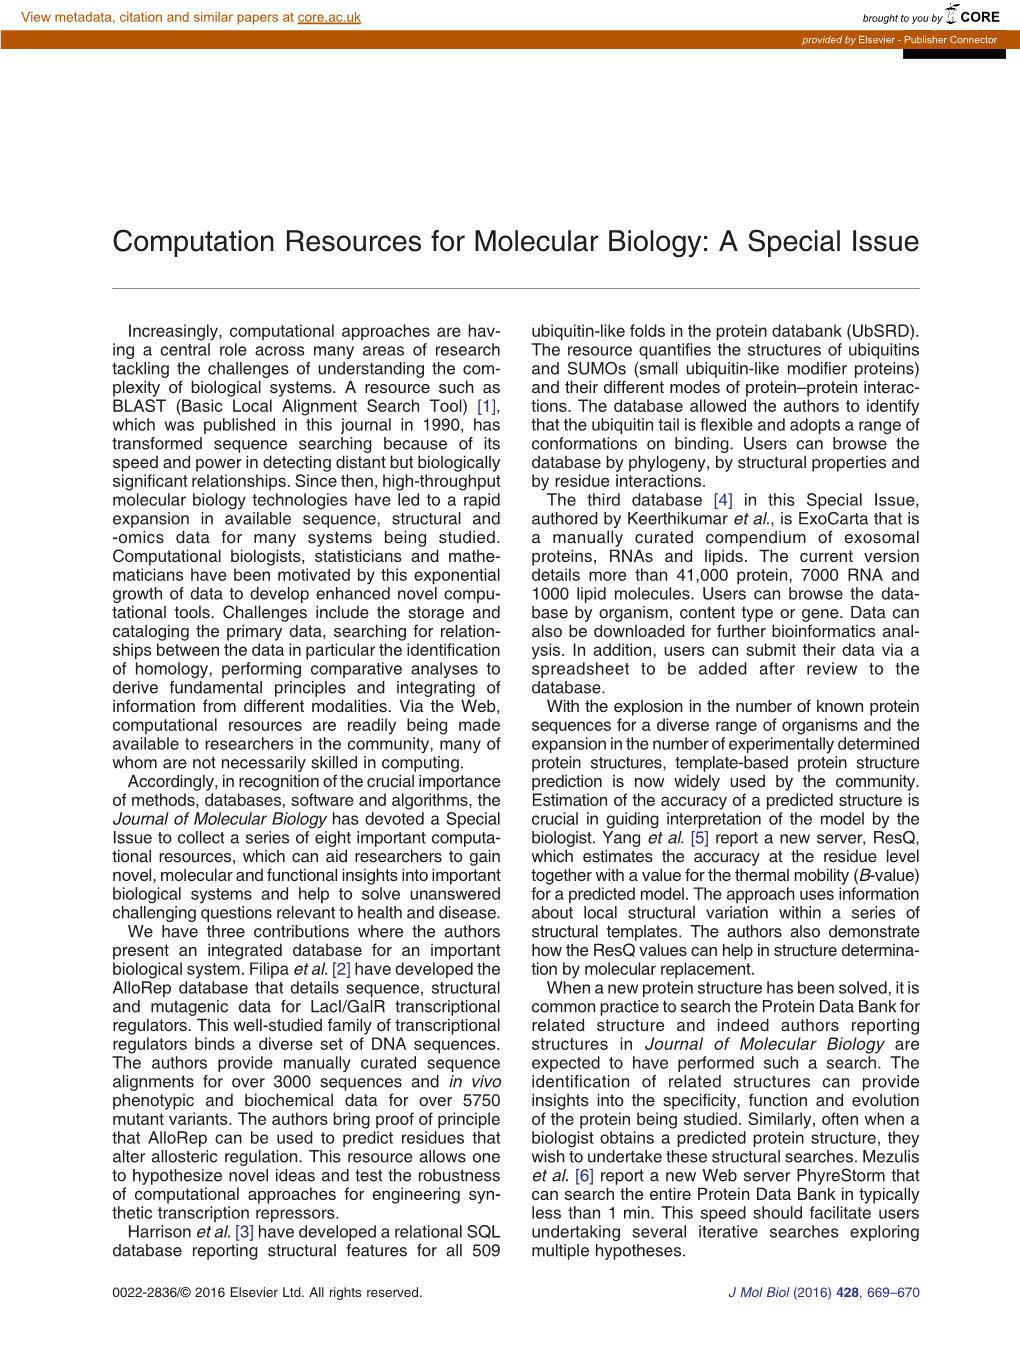 Computation Resources for Molecular Biology: a Special Issue